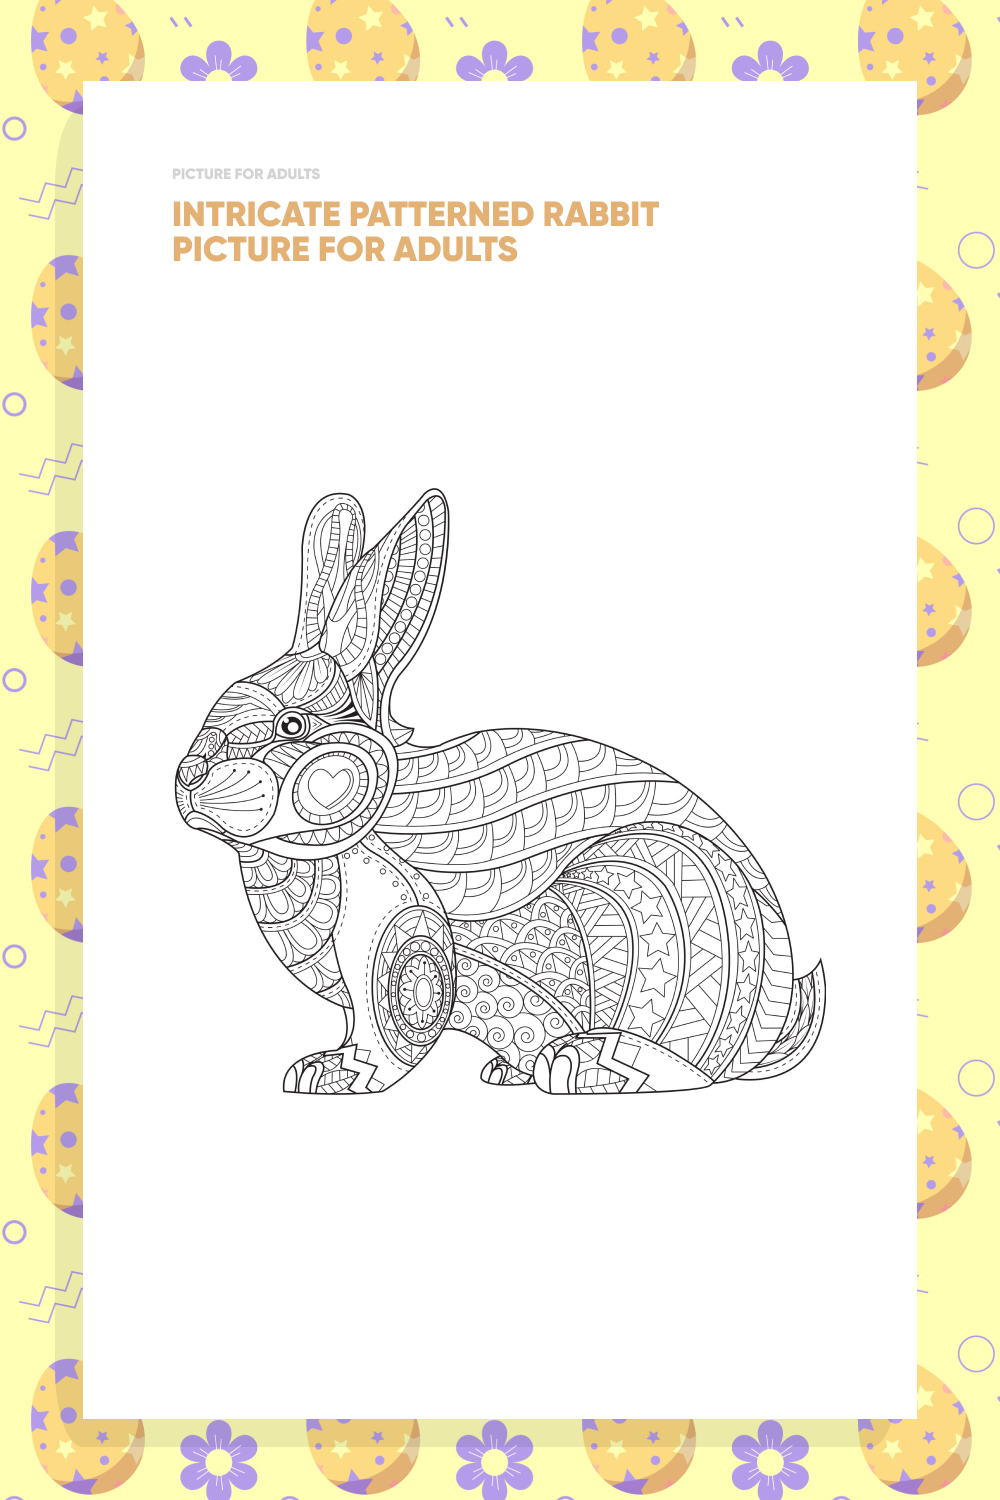 Intricate Patterned Rabbit Picture for Adults pinterest.